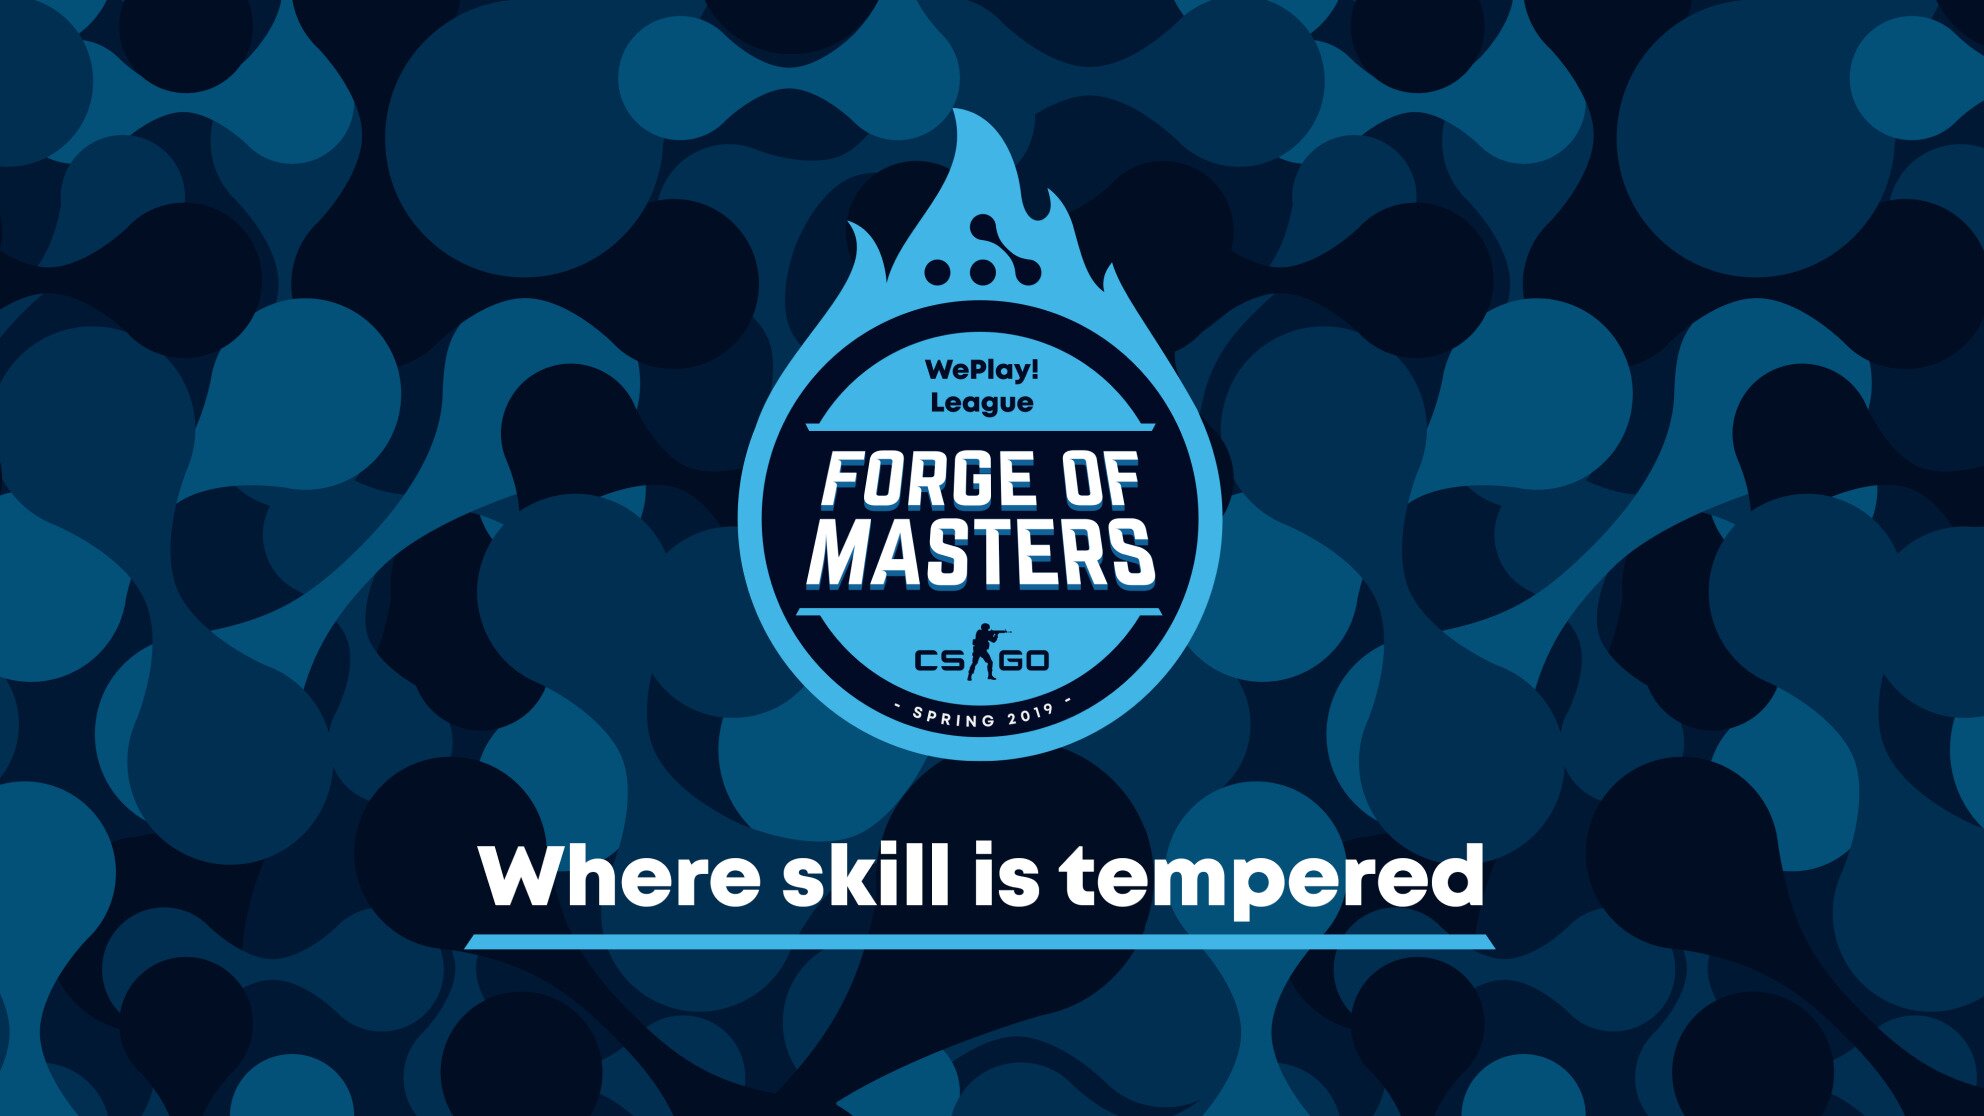 Forge of Masters will feature 12 teams from the CIS Region and 12 from EU.